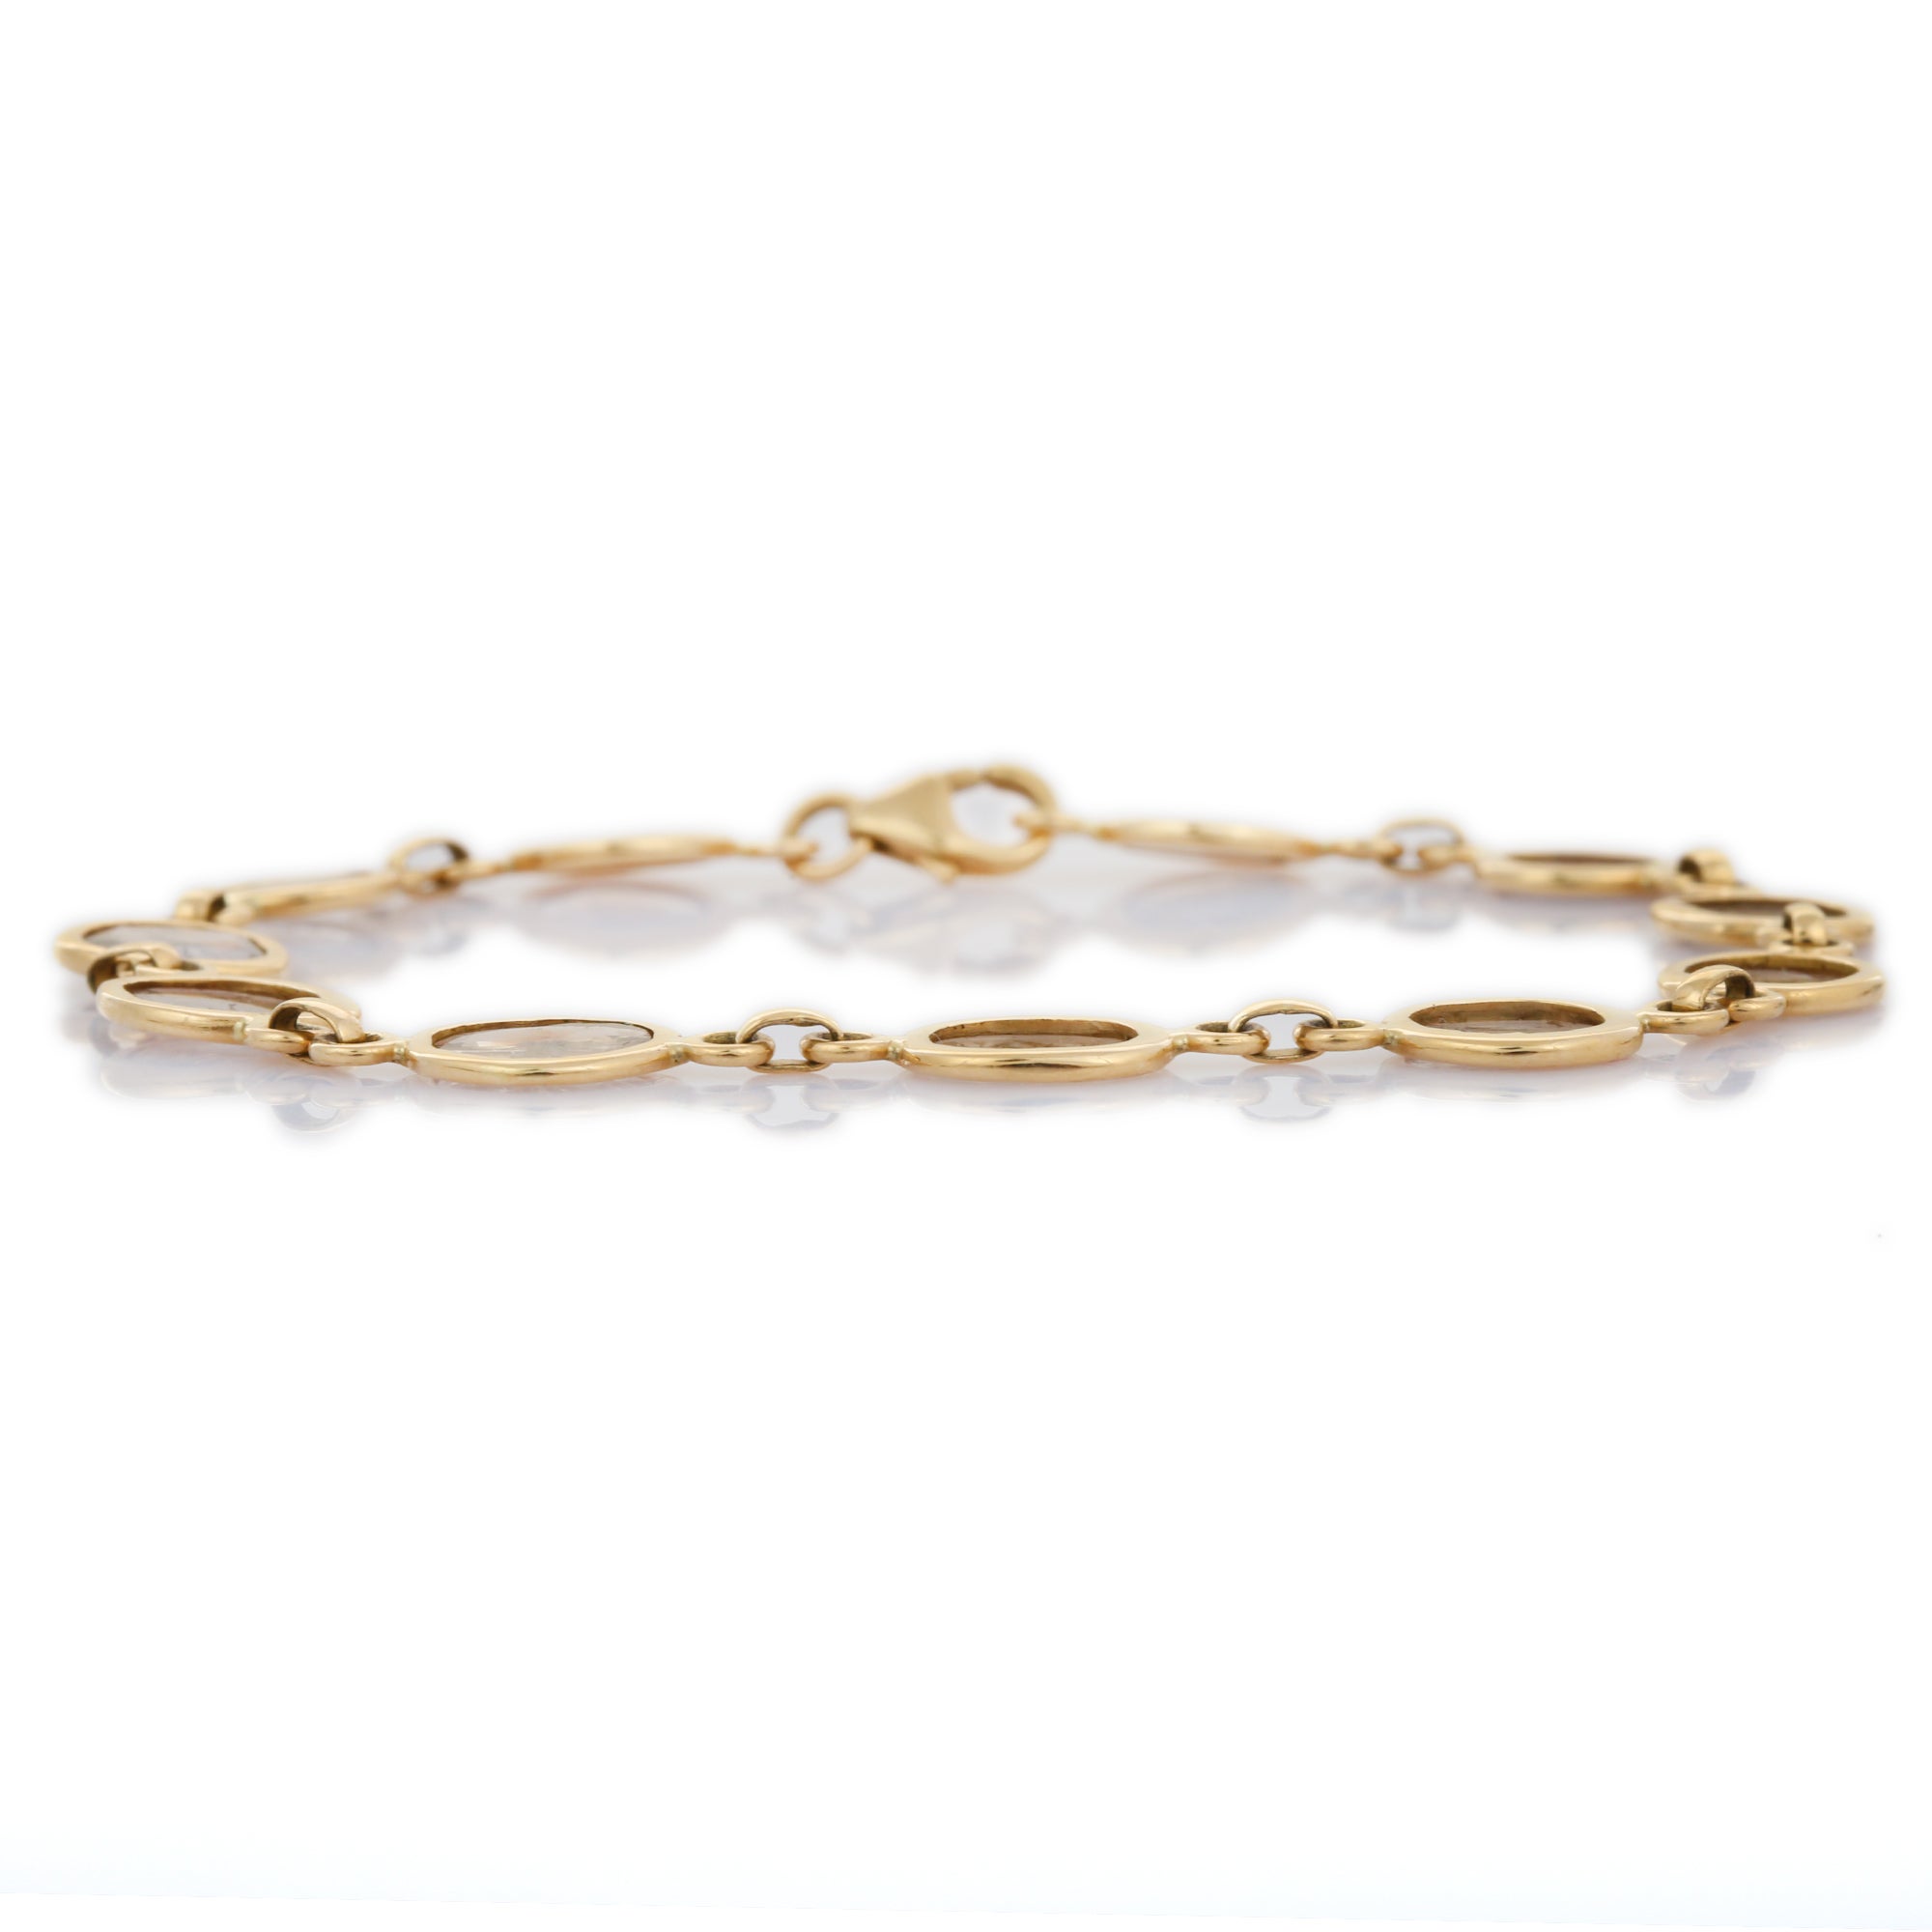 This Uncut Diamond Chain Bracelet in 18K gold showcases sparkling natural diamonds, weighing 3.95 carats. 
April birthstone diamond brings love, fame, success and prosperity.
Designed with uncut diamond set in bezel setting to make you stand out on